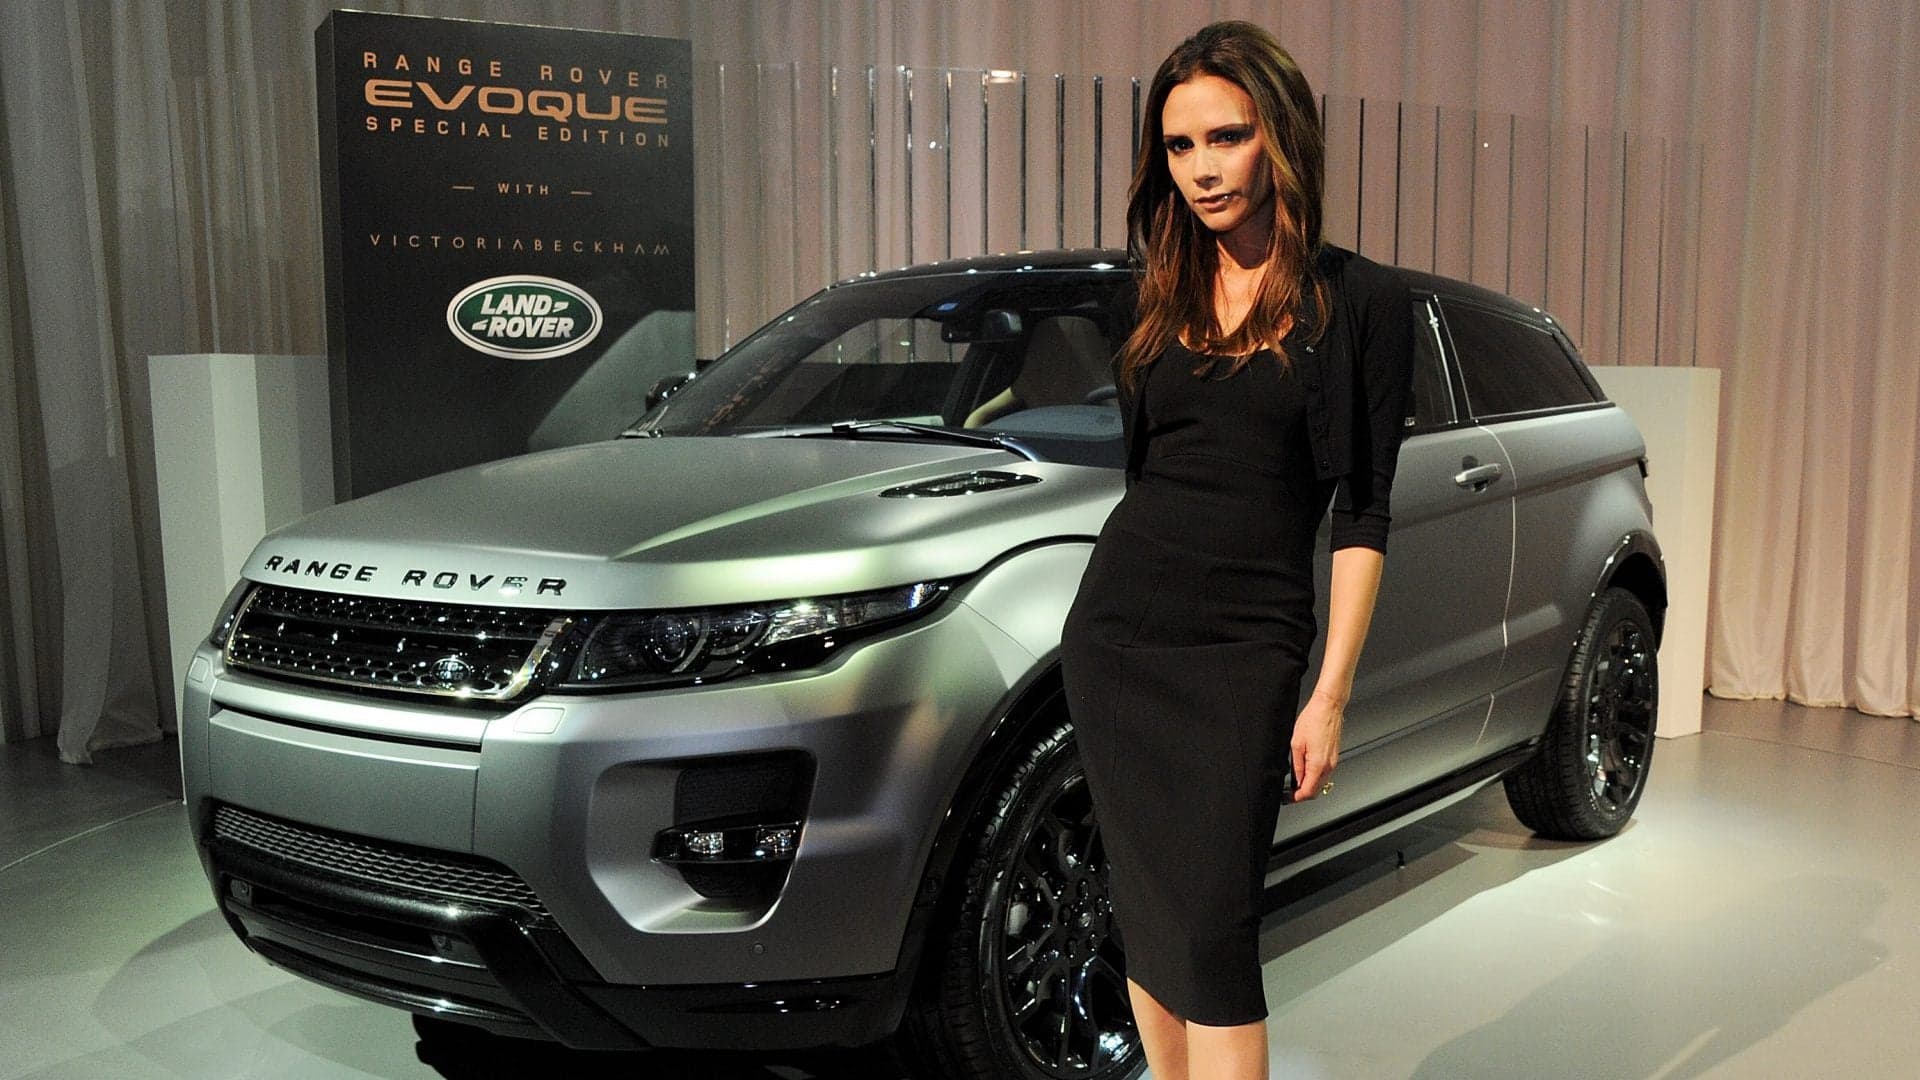 The Range Rover Evoque Is the Most Popular Car Among U.K. Footballers